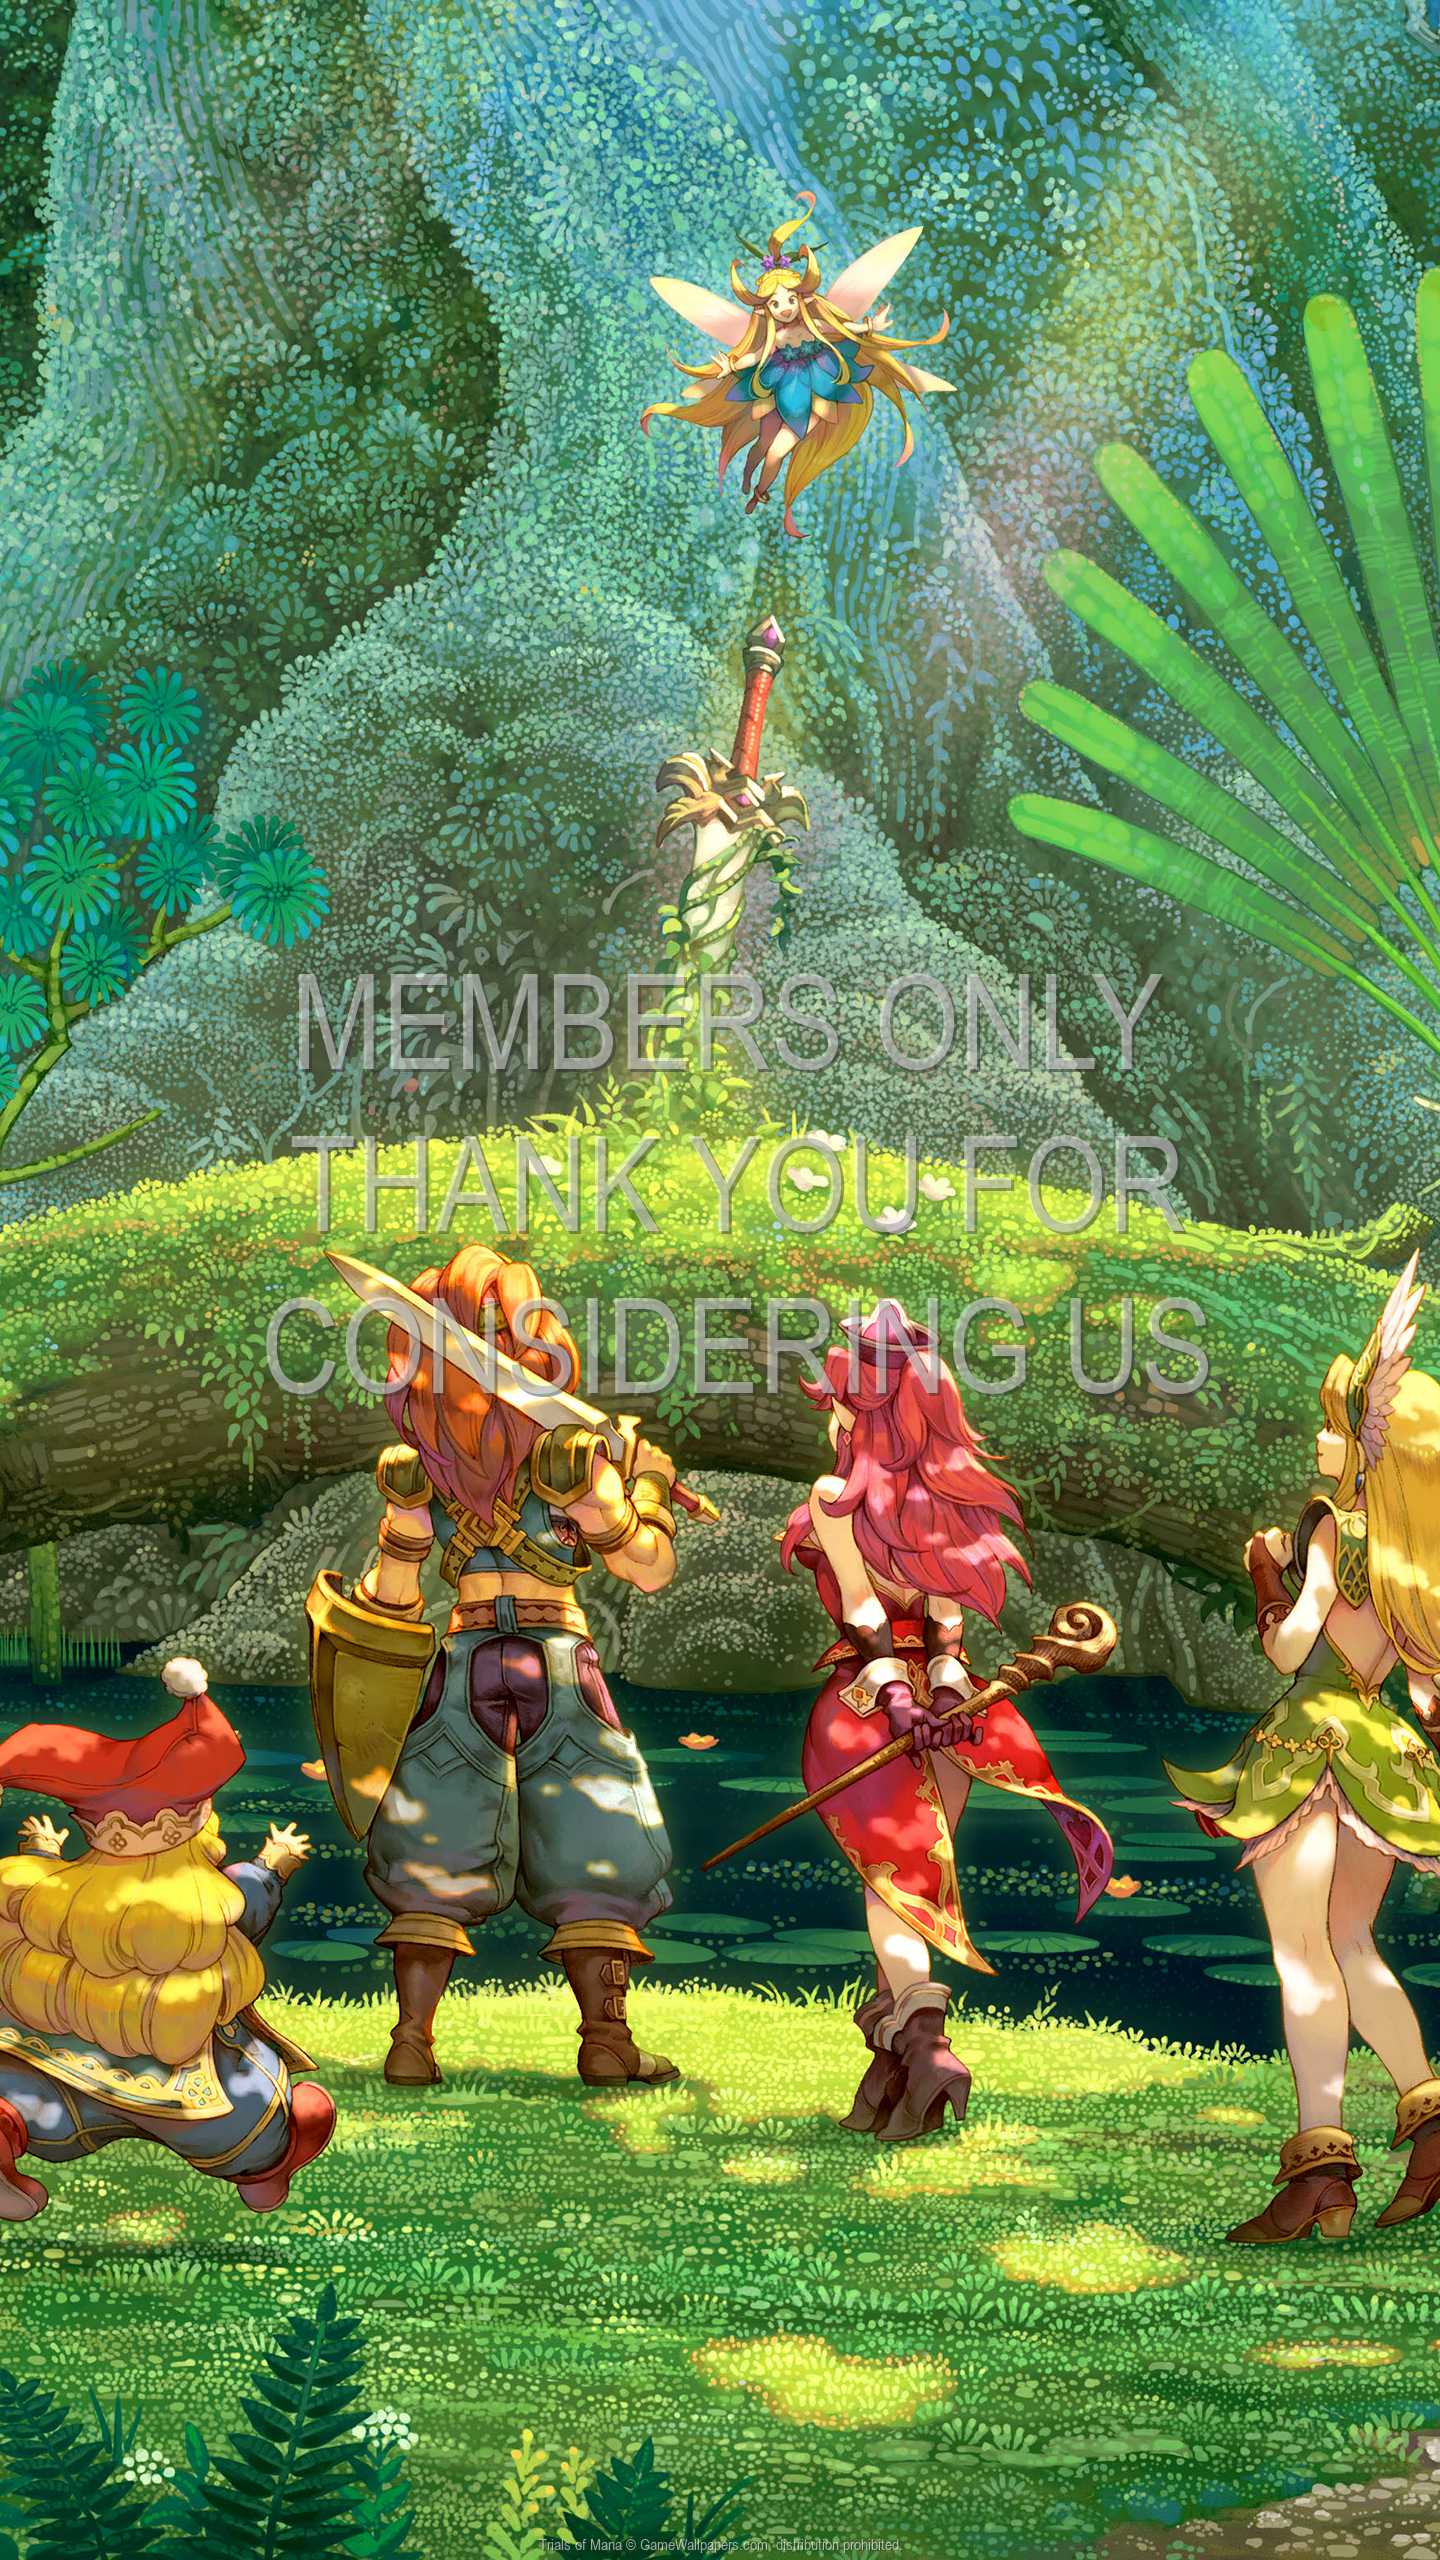 Trials of Mana 1440p Vertical Mobile wallpaper or background 01